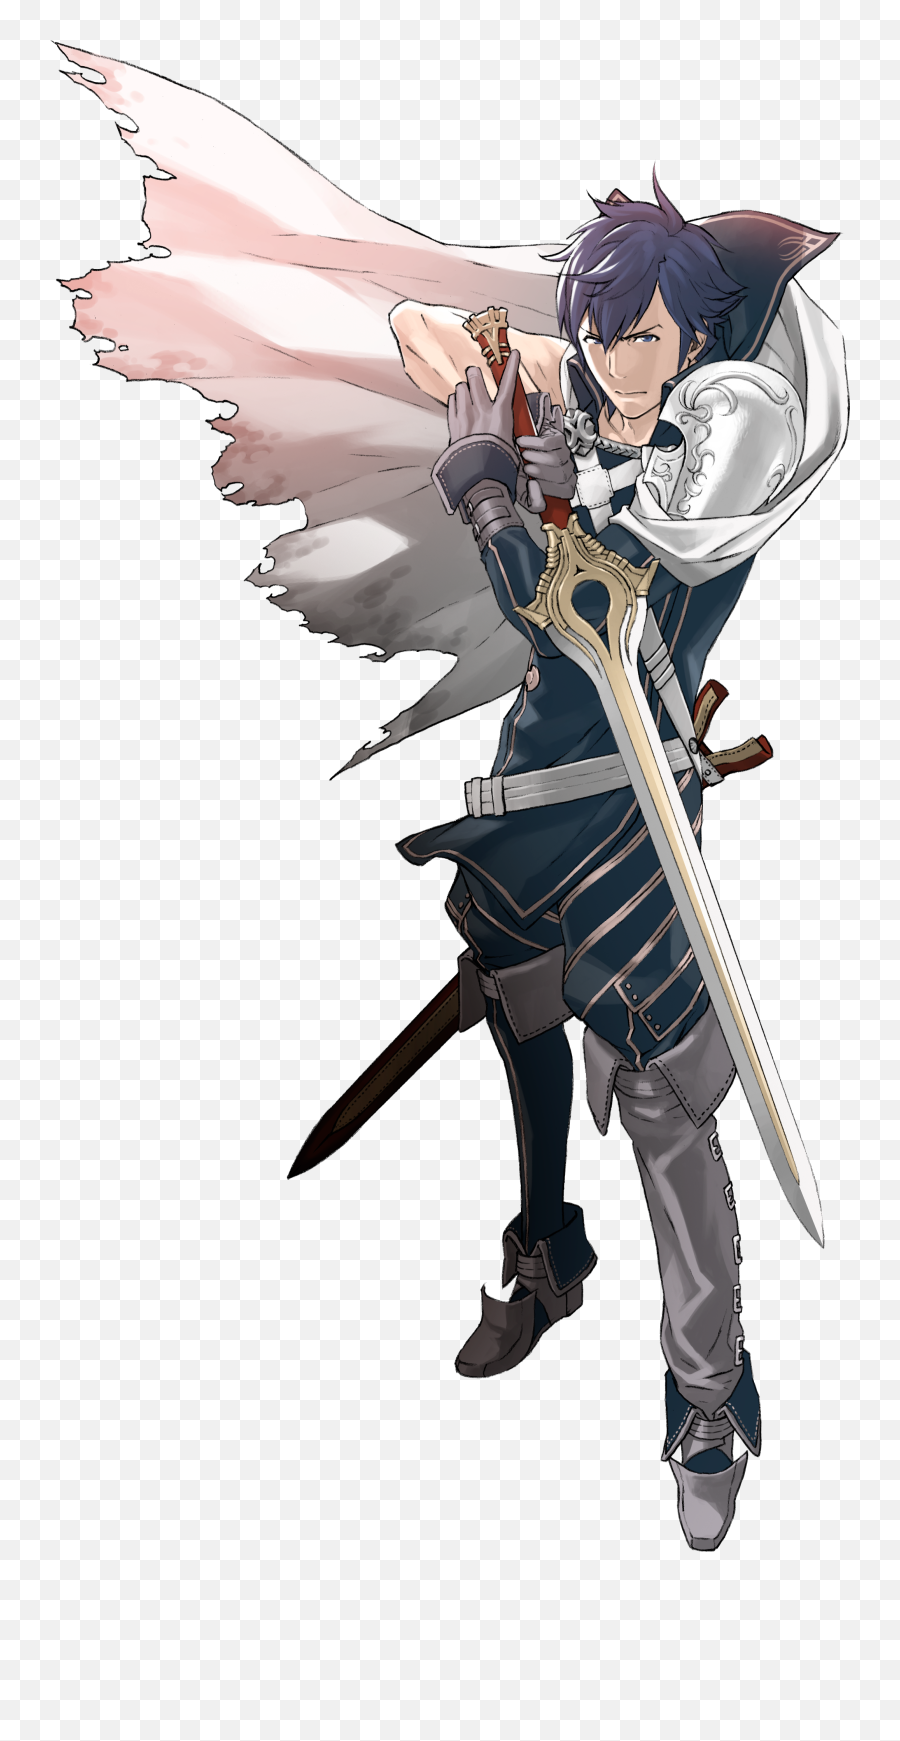 Chrom Character - Giant Bomb Video Game Character Designs Png,Marth Transparent